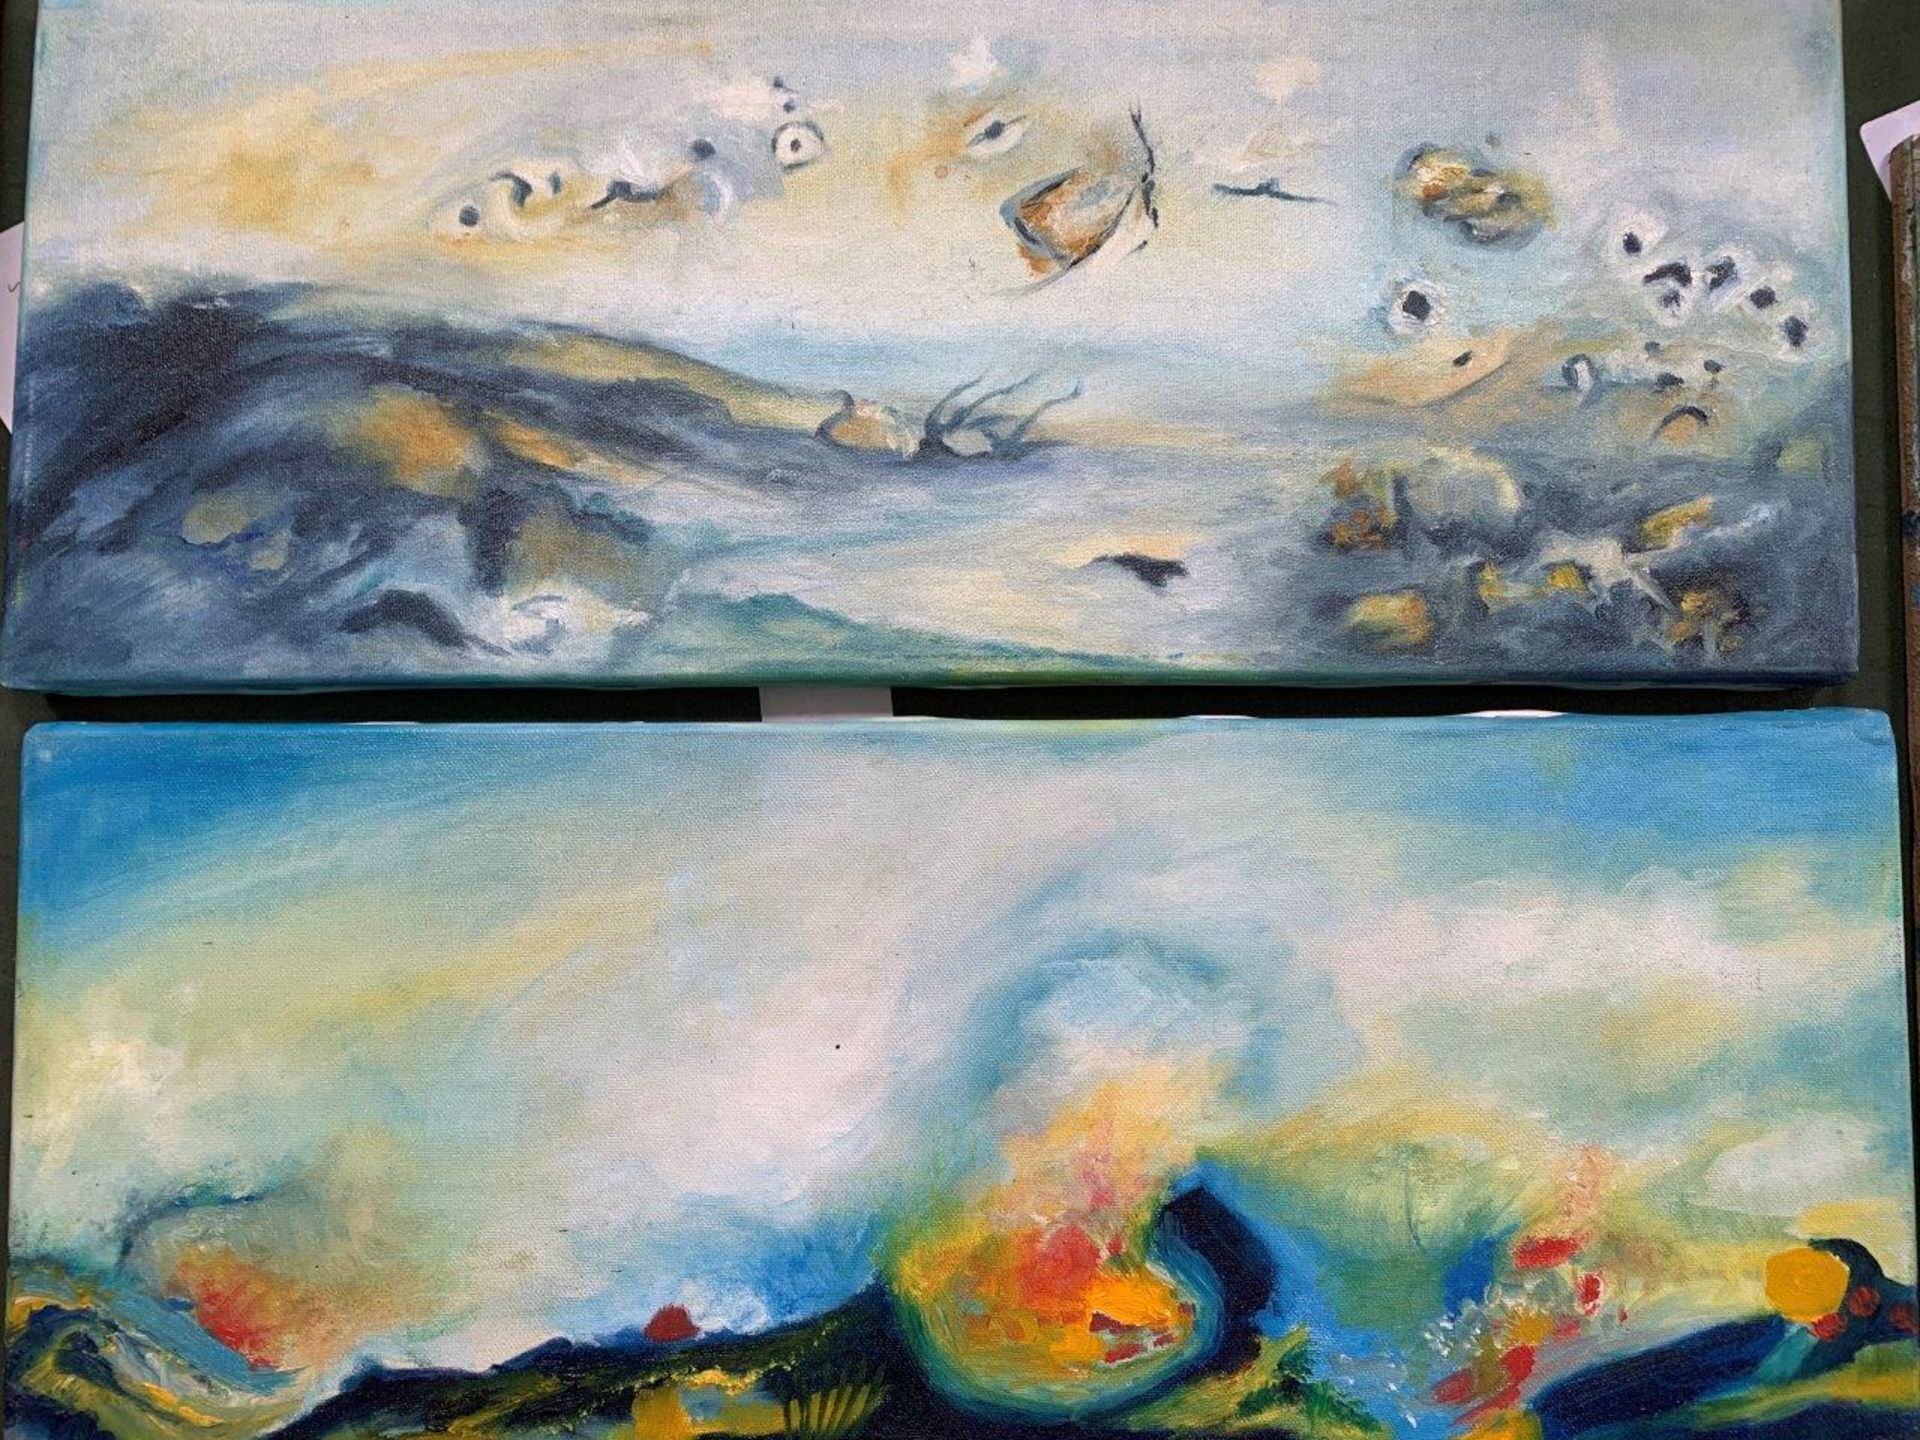 Two abstract oils on canvas by B Siomiak (Russian), each 20 x 51cms.